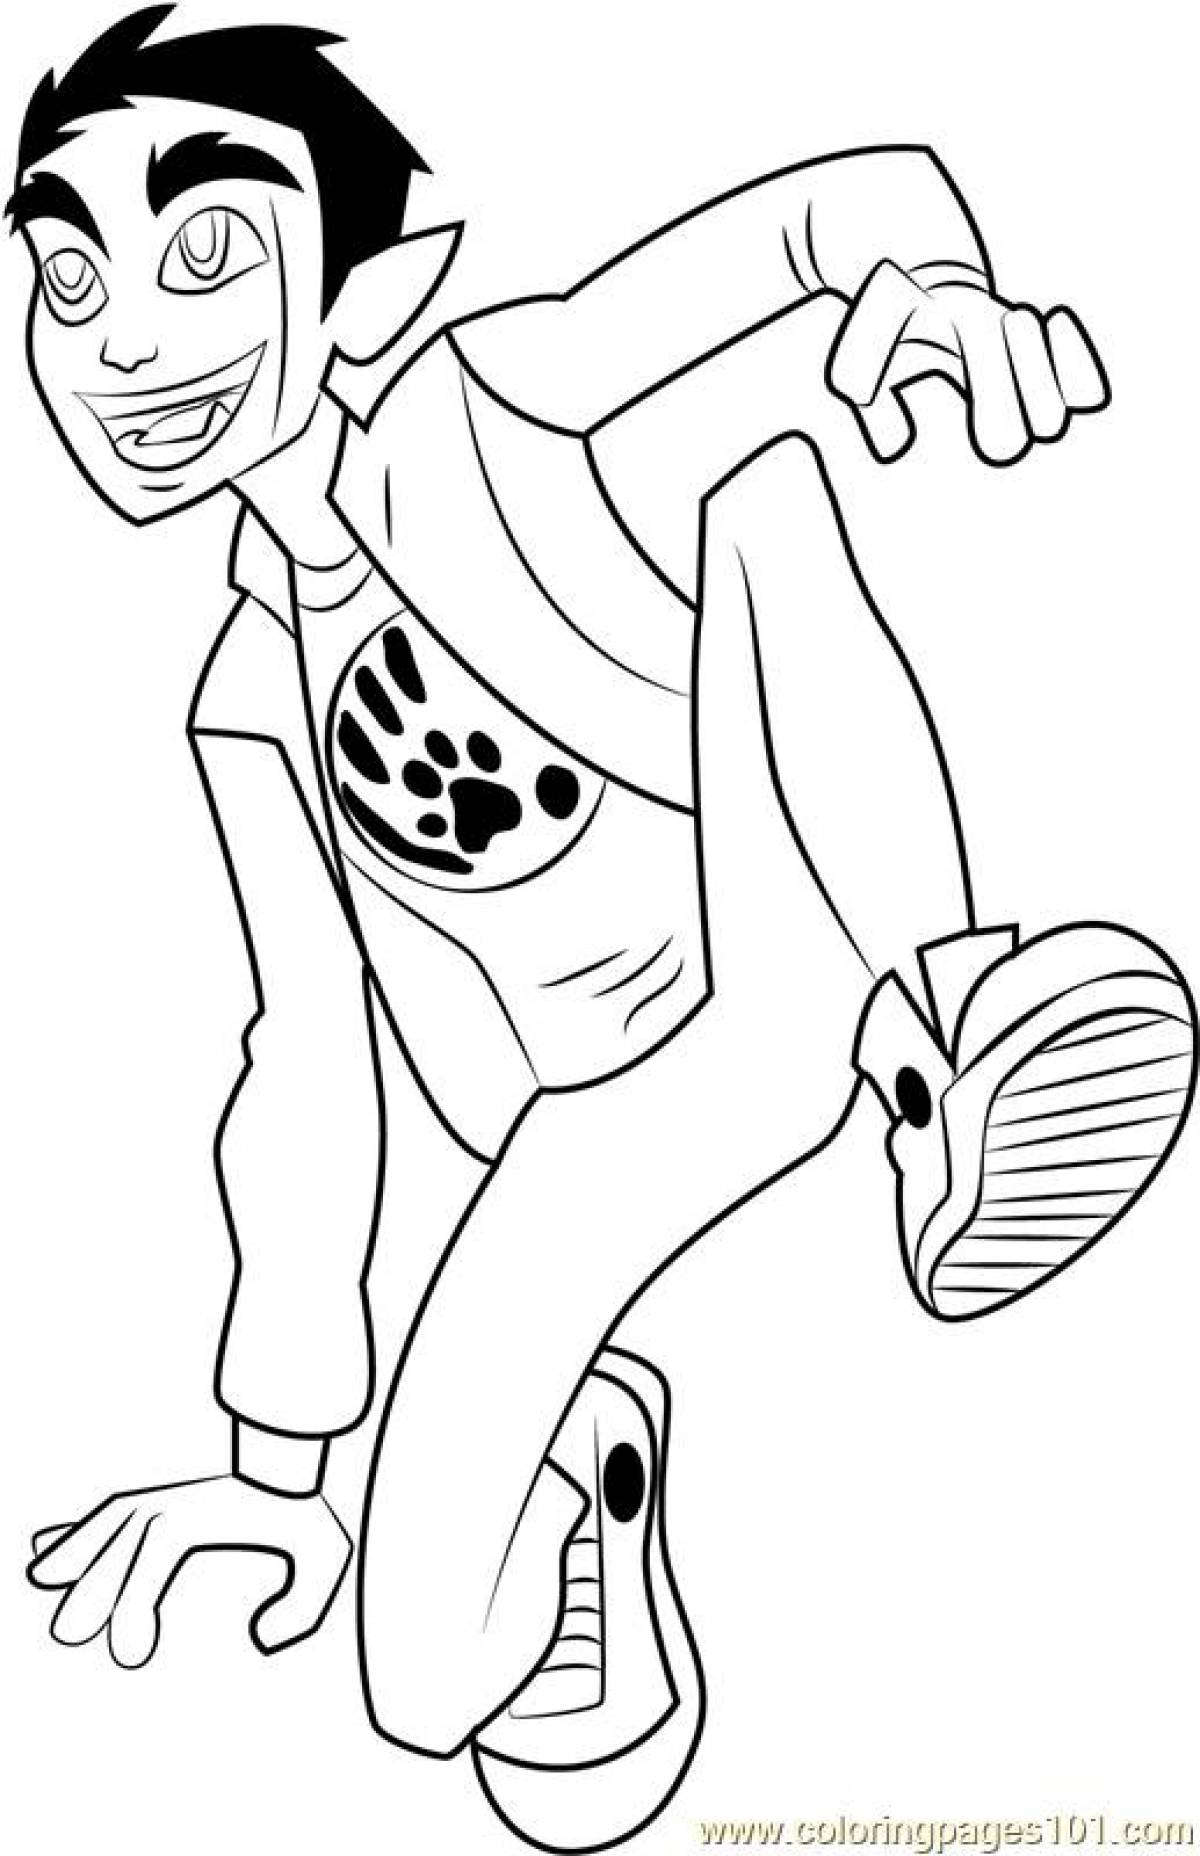 Charming mr best coloring page